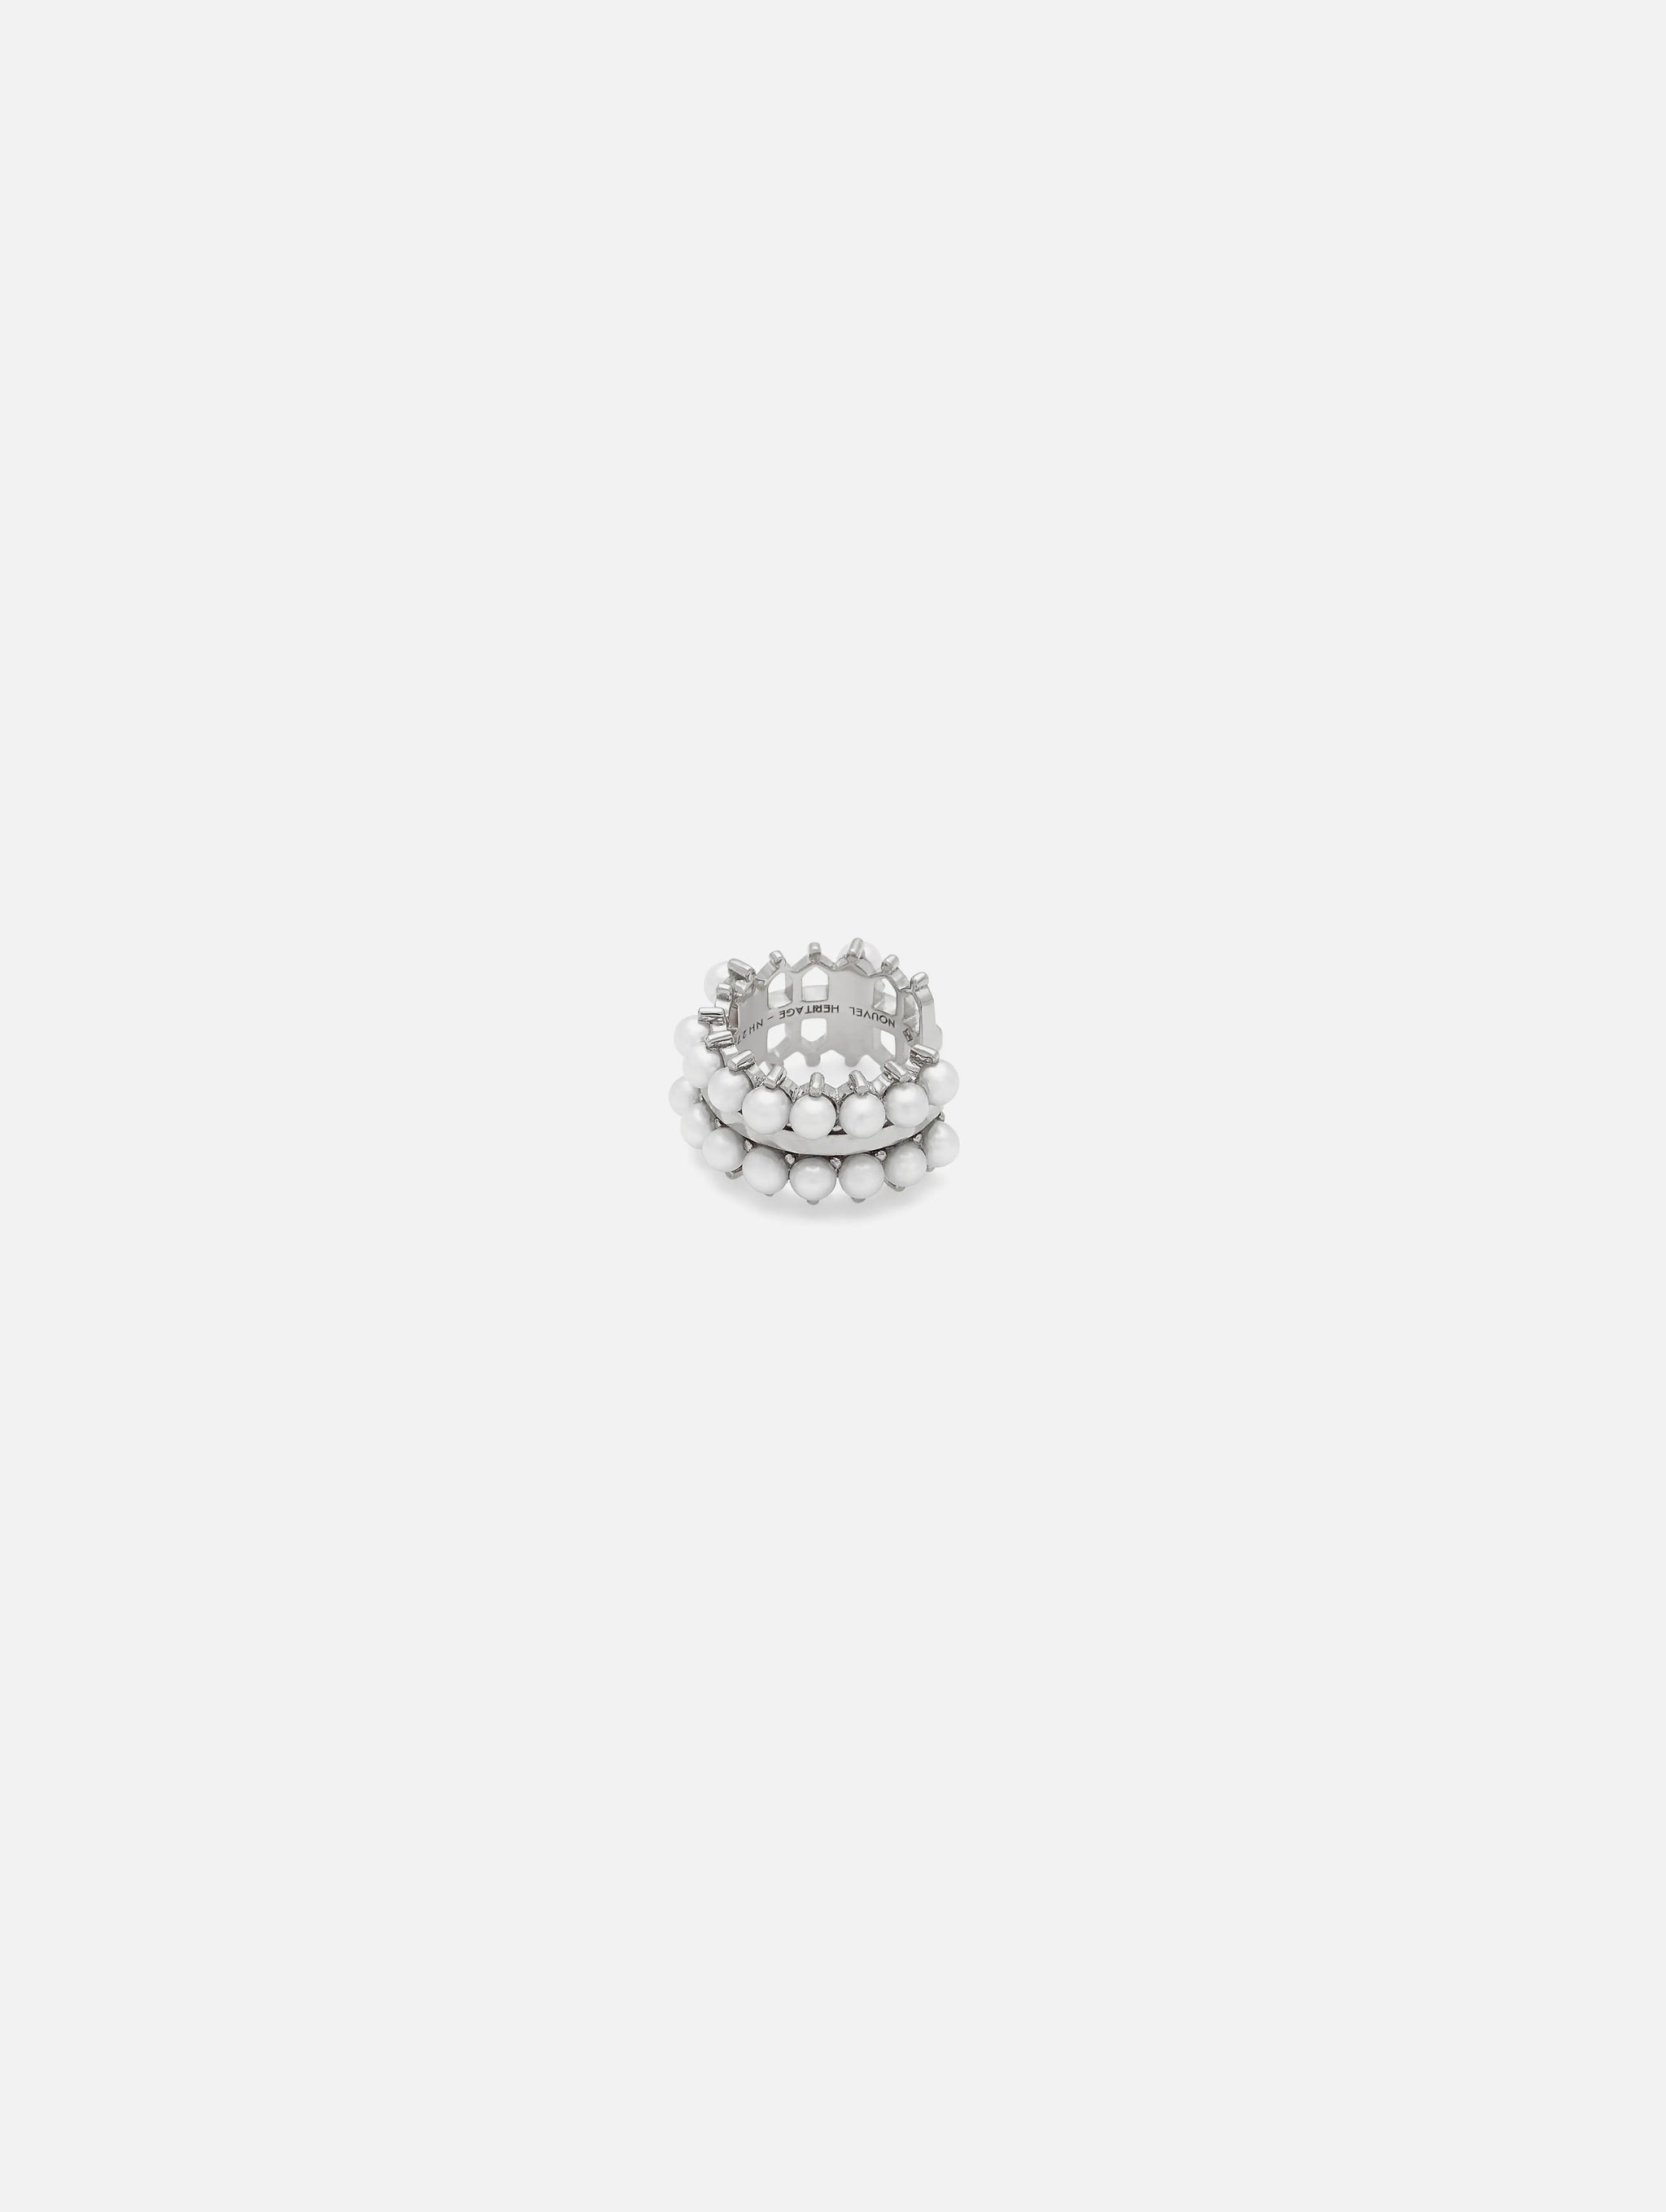 Double Pearl Ear Cuff in White Gold - 1 - Nouvel Heritage